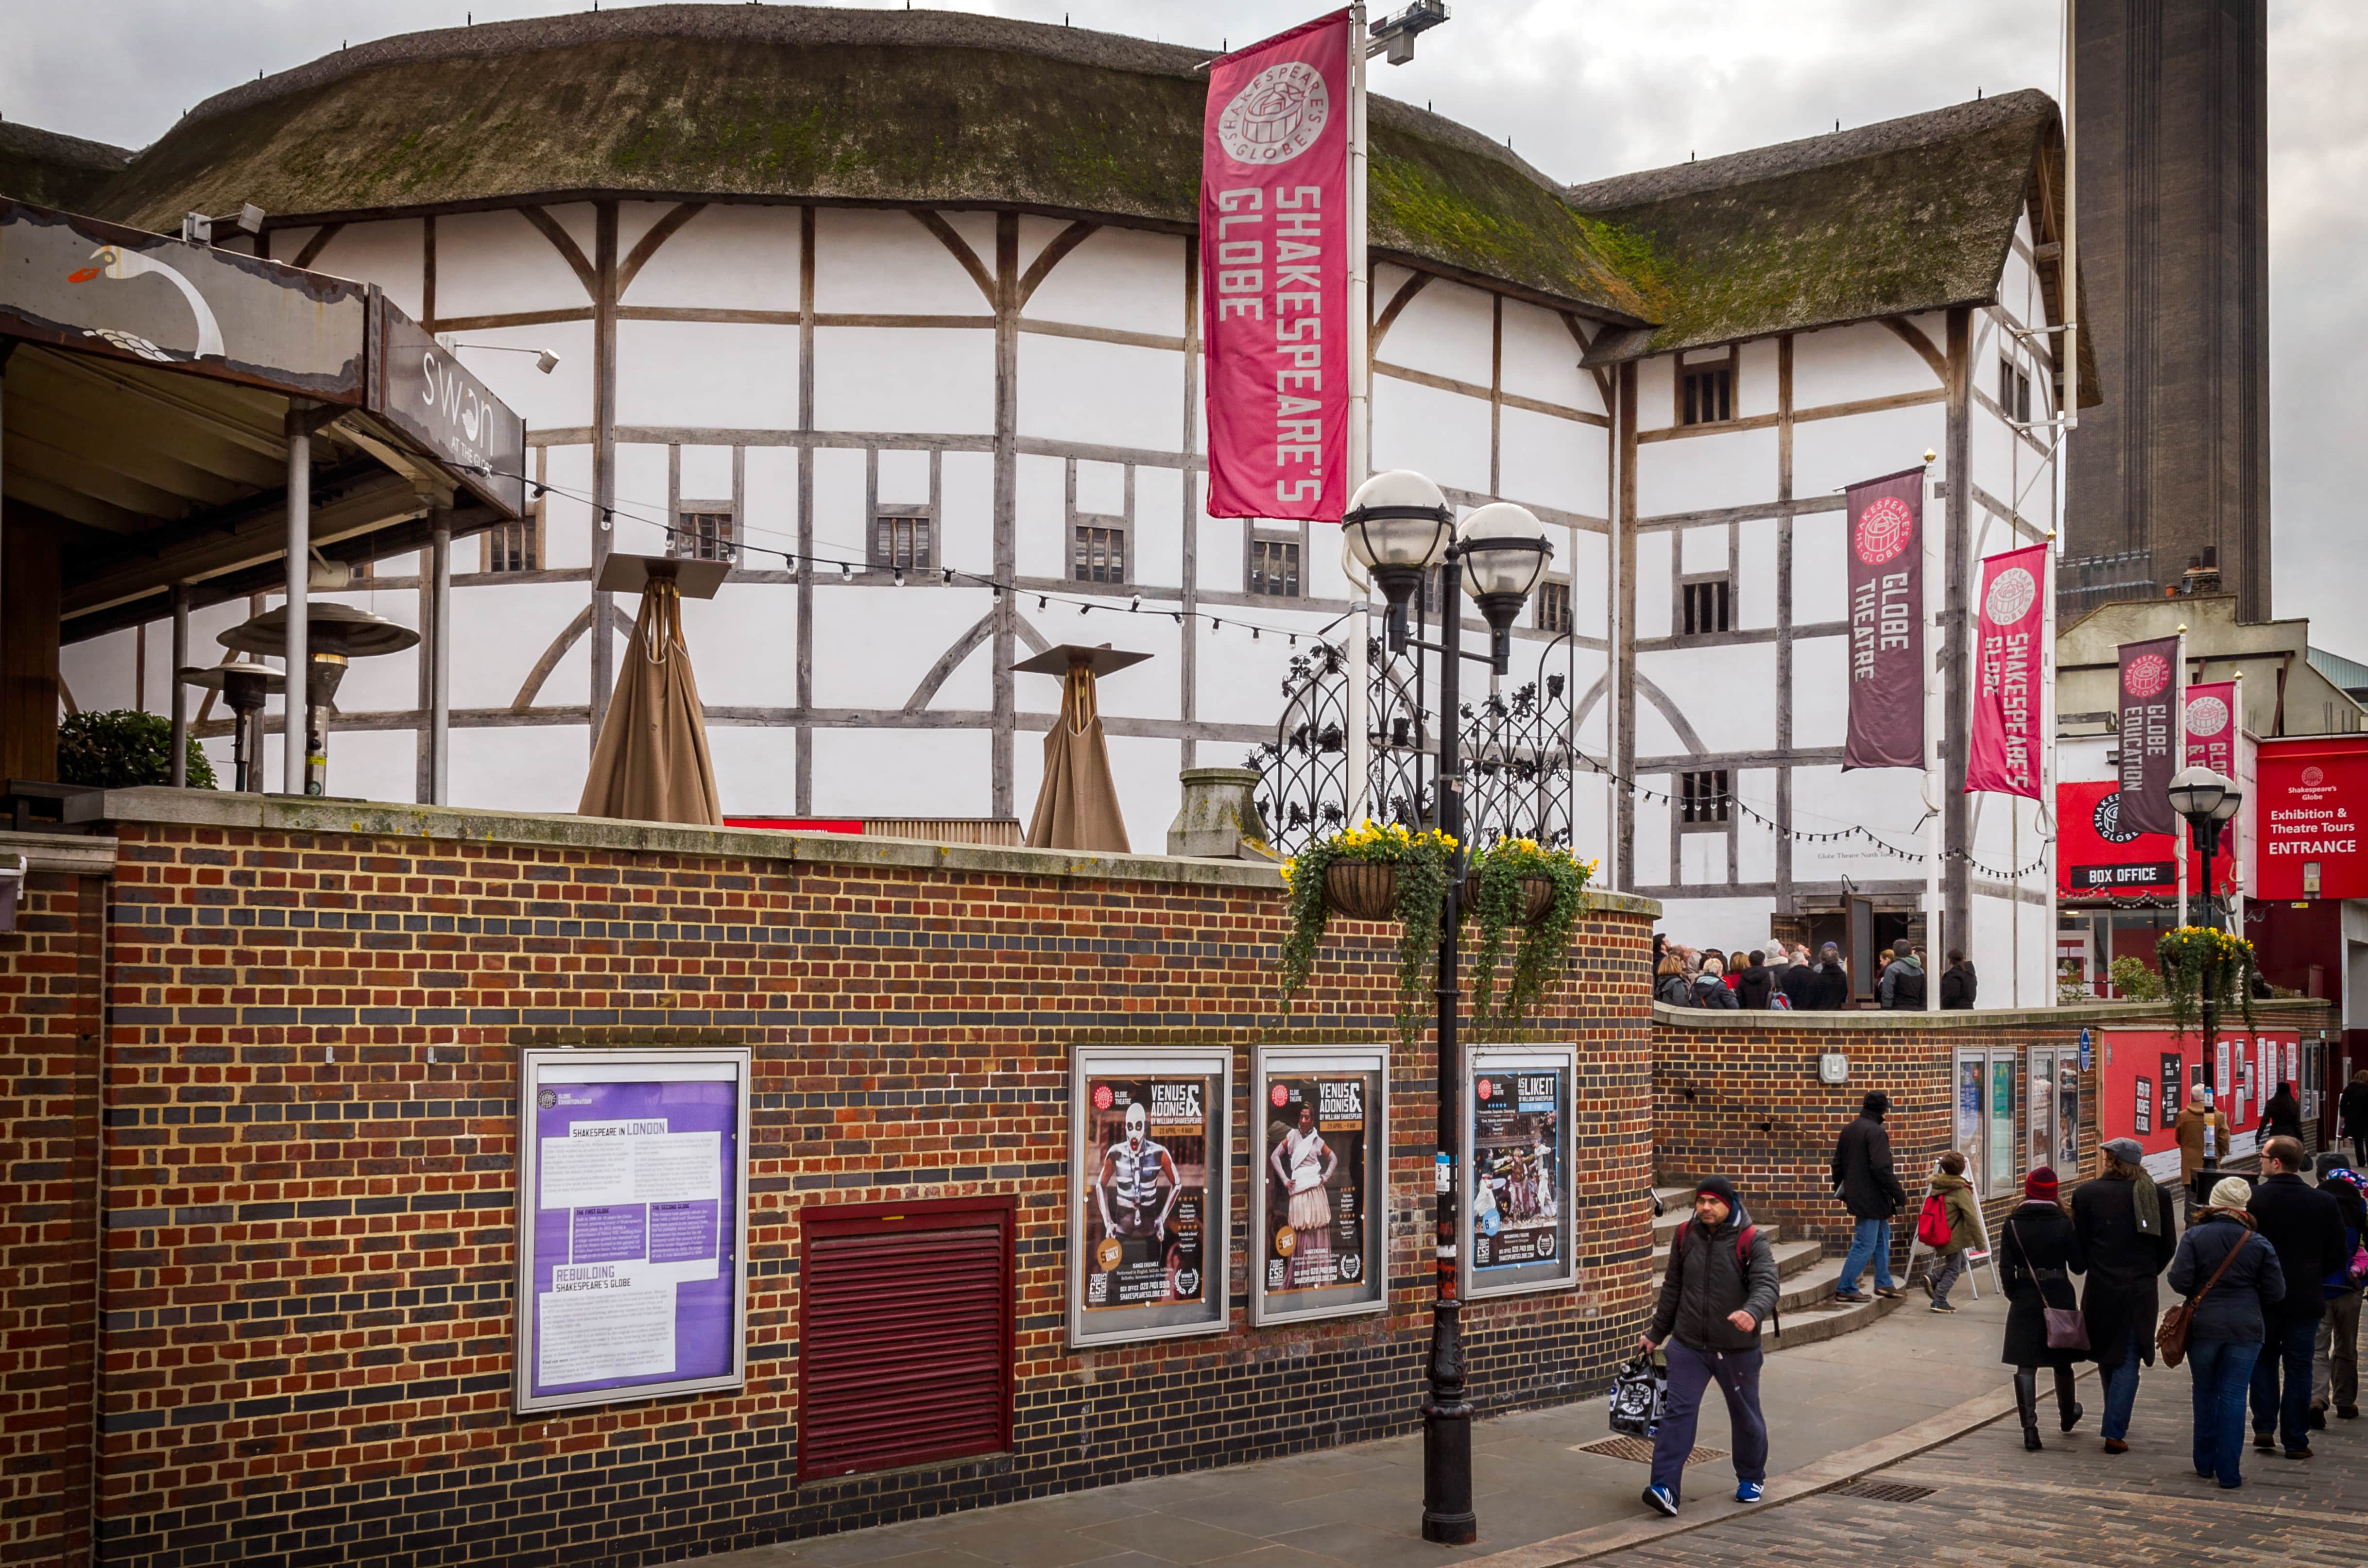 The iconic Globe Theatre is an awesome place to visit in London